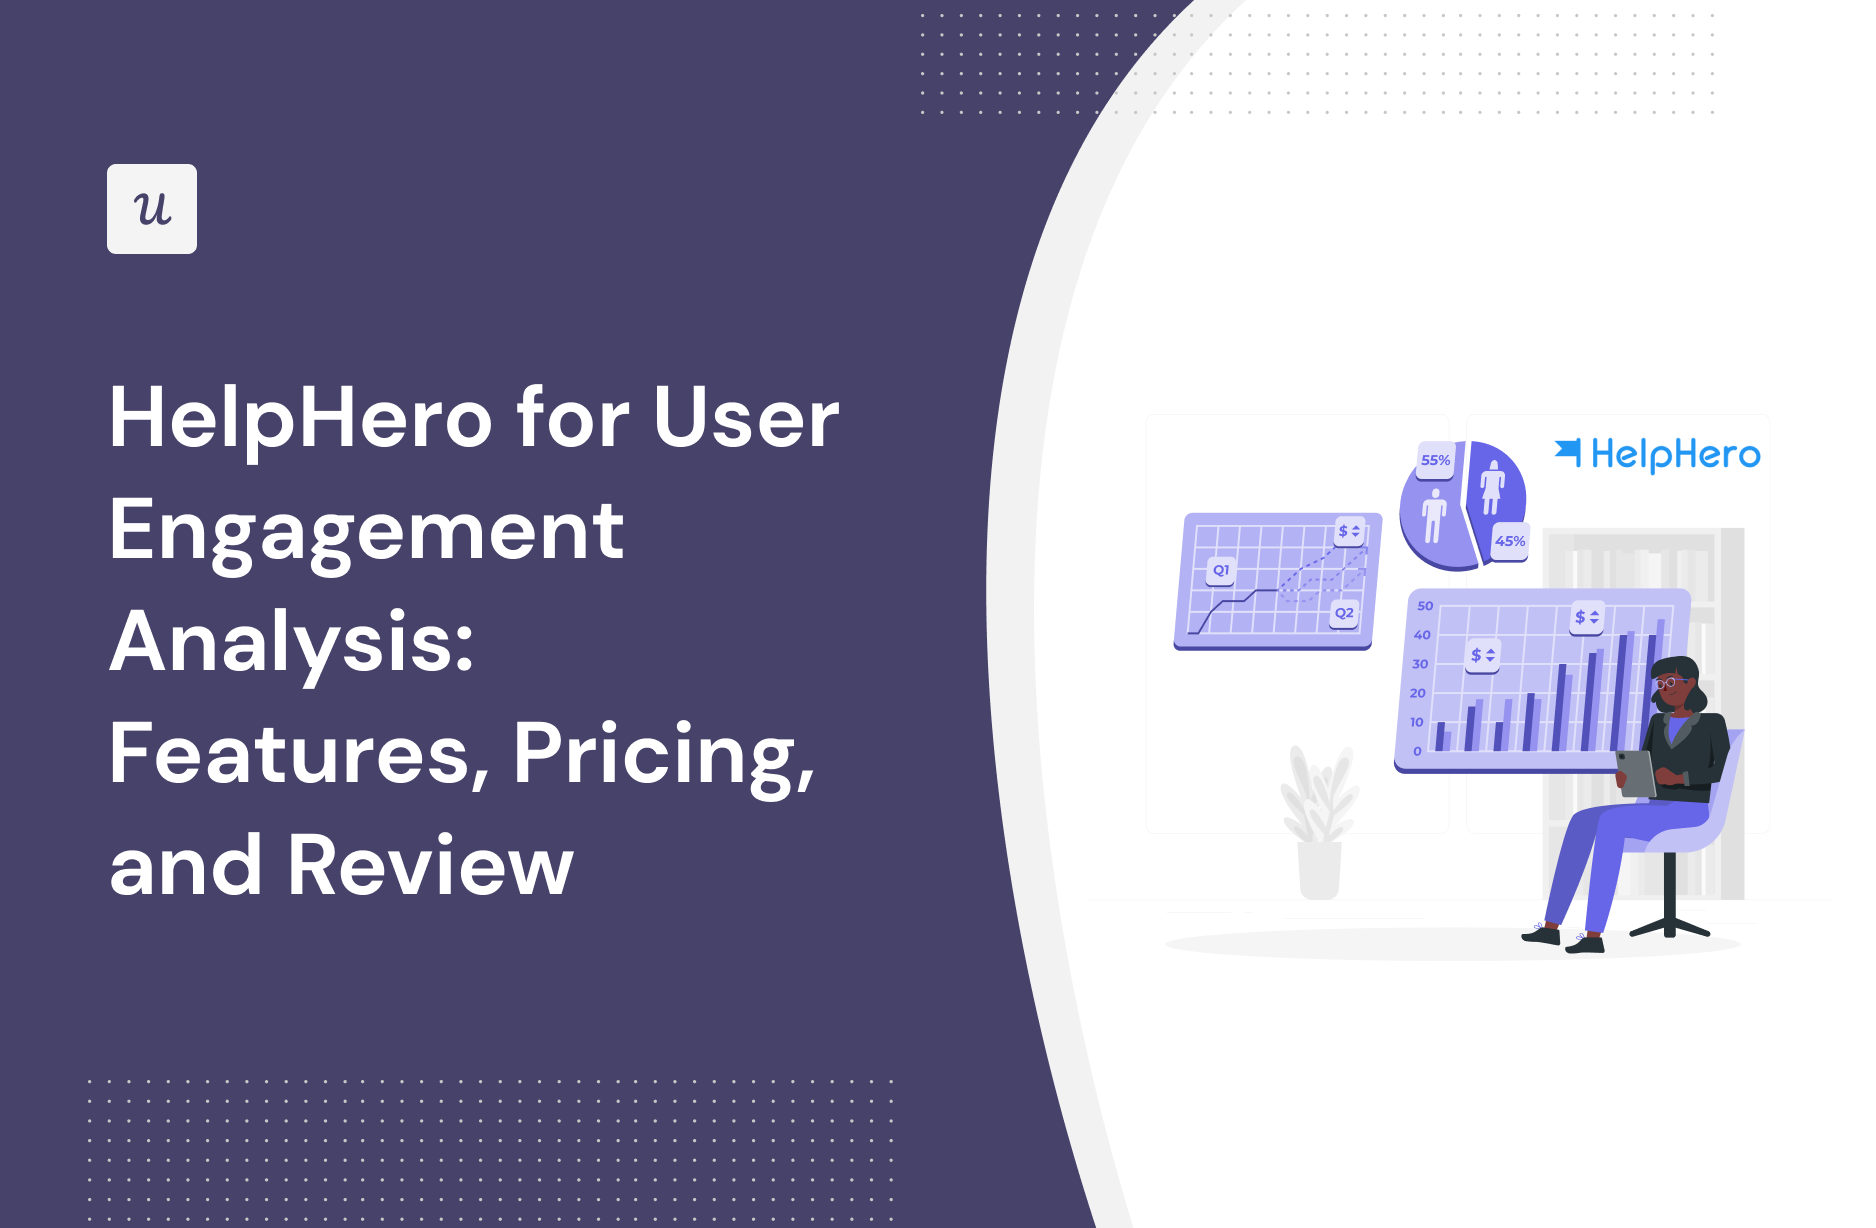 HelpHero for User Engagement Analysis: Features, Pricing, and Review